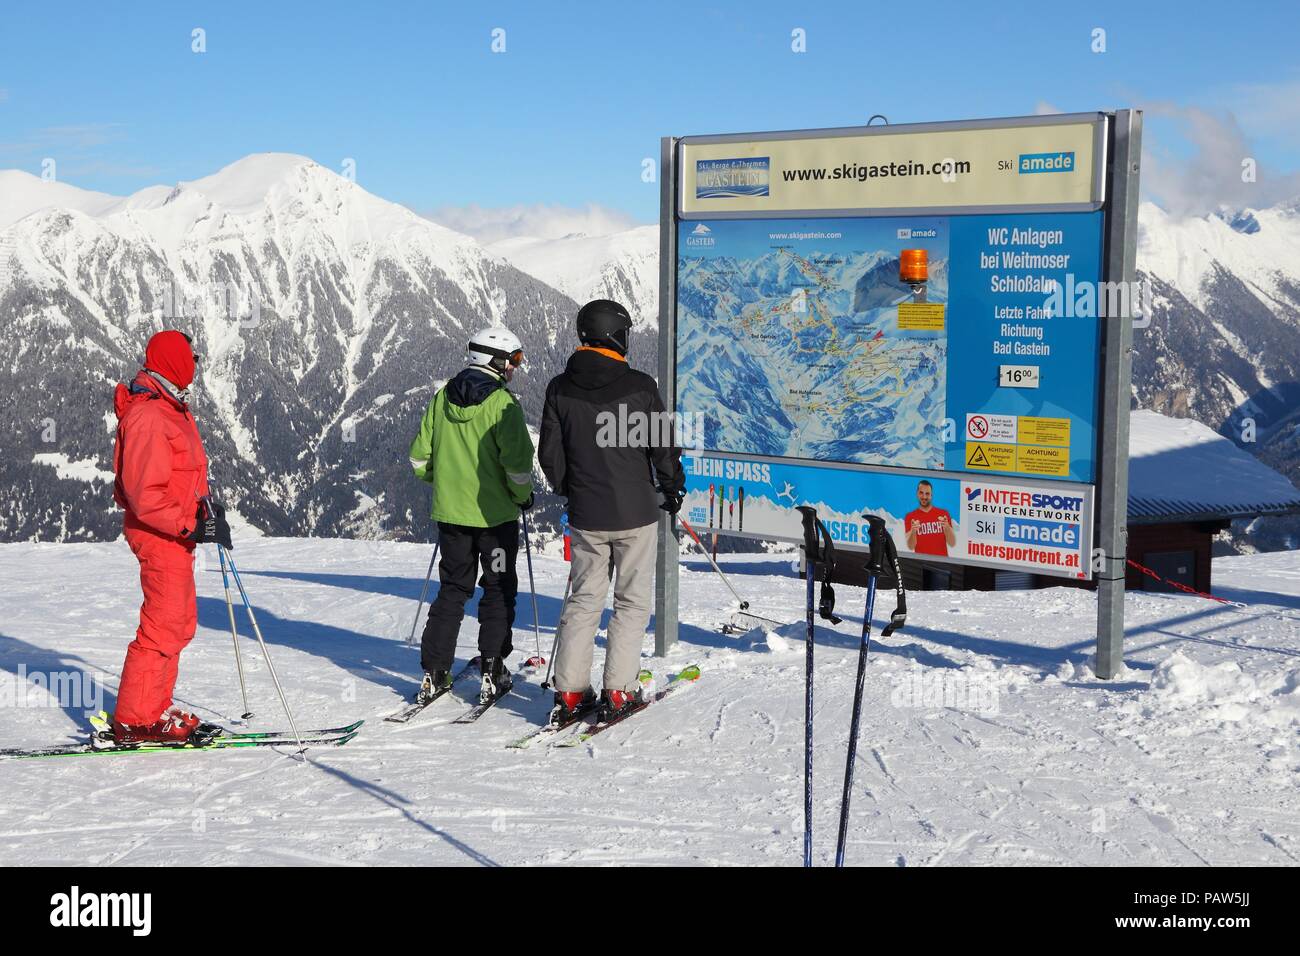 BAD HOFGASTEIN, AUSTRIA - MARCH 9, 2016: People analyze map in Bad Hofgastein. It is part of Ski Amade, one of largest ski regions in Europe with 760k Stock Photo